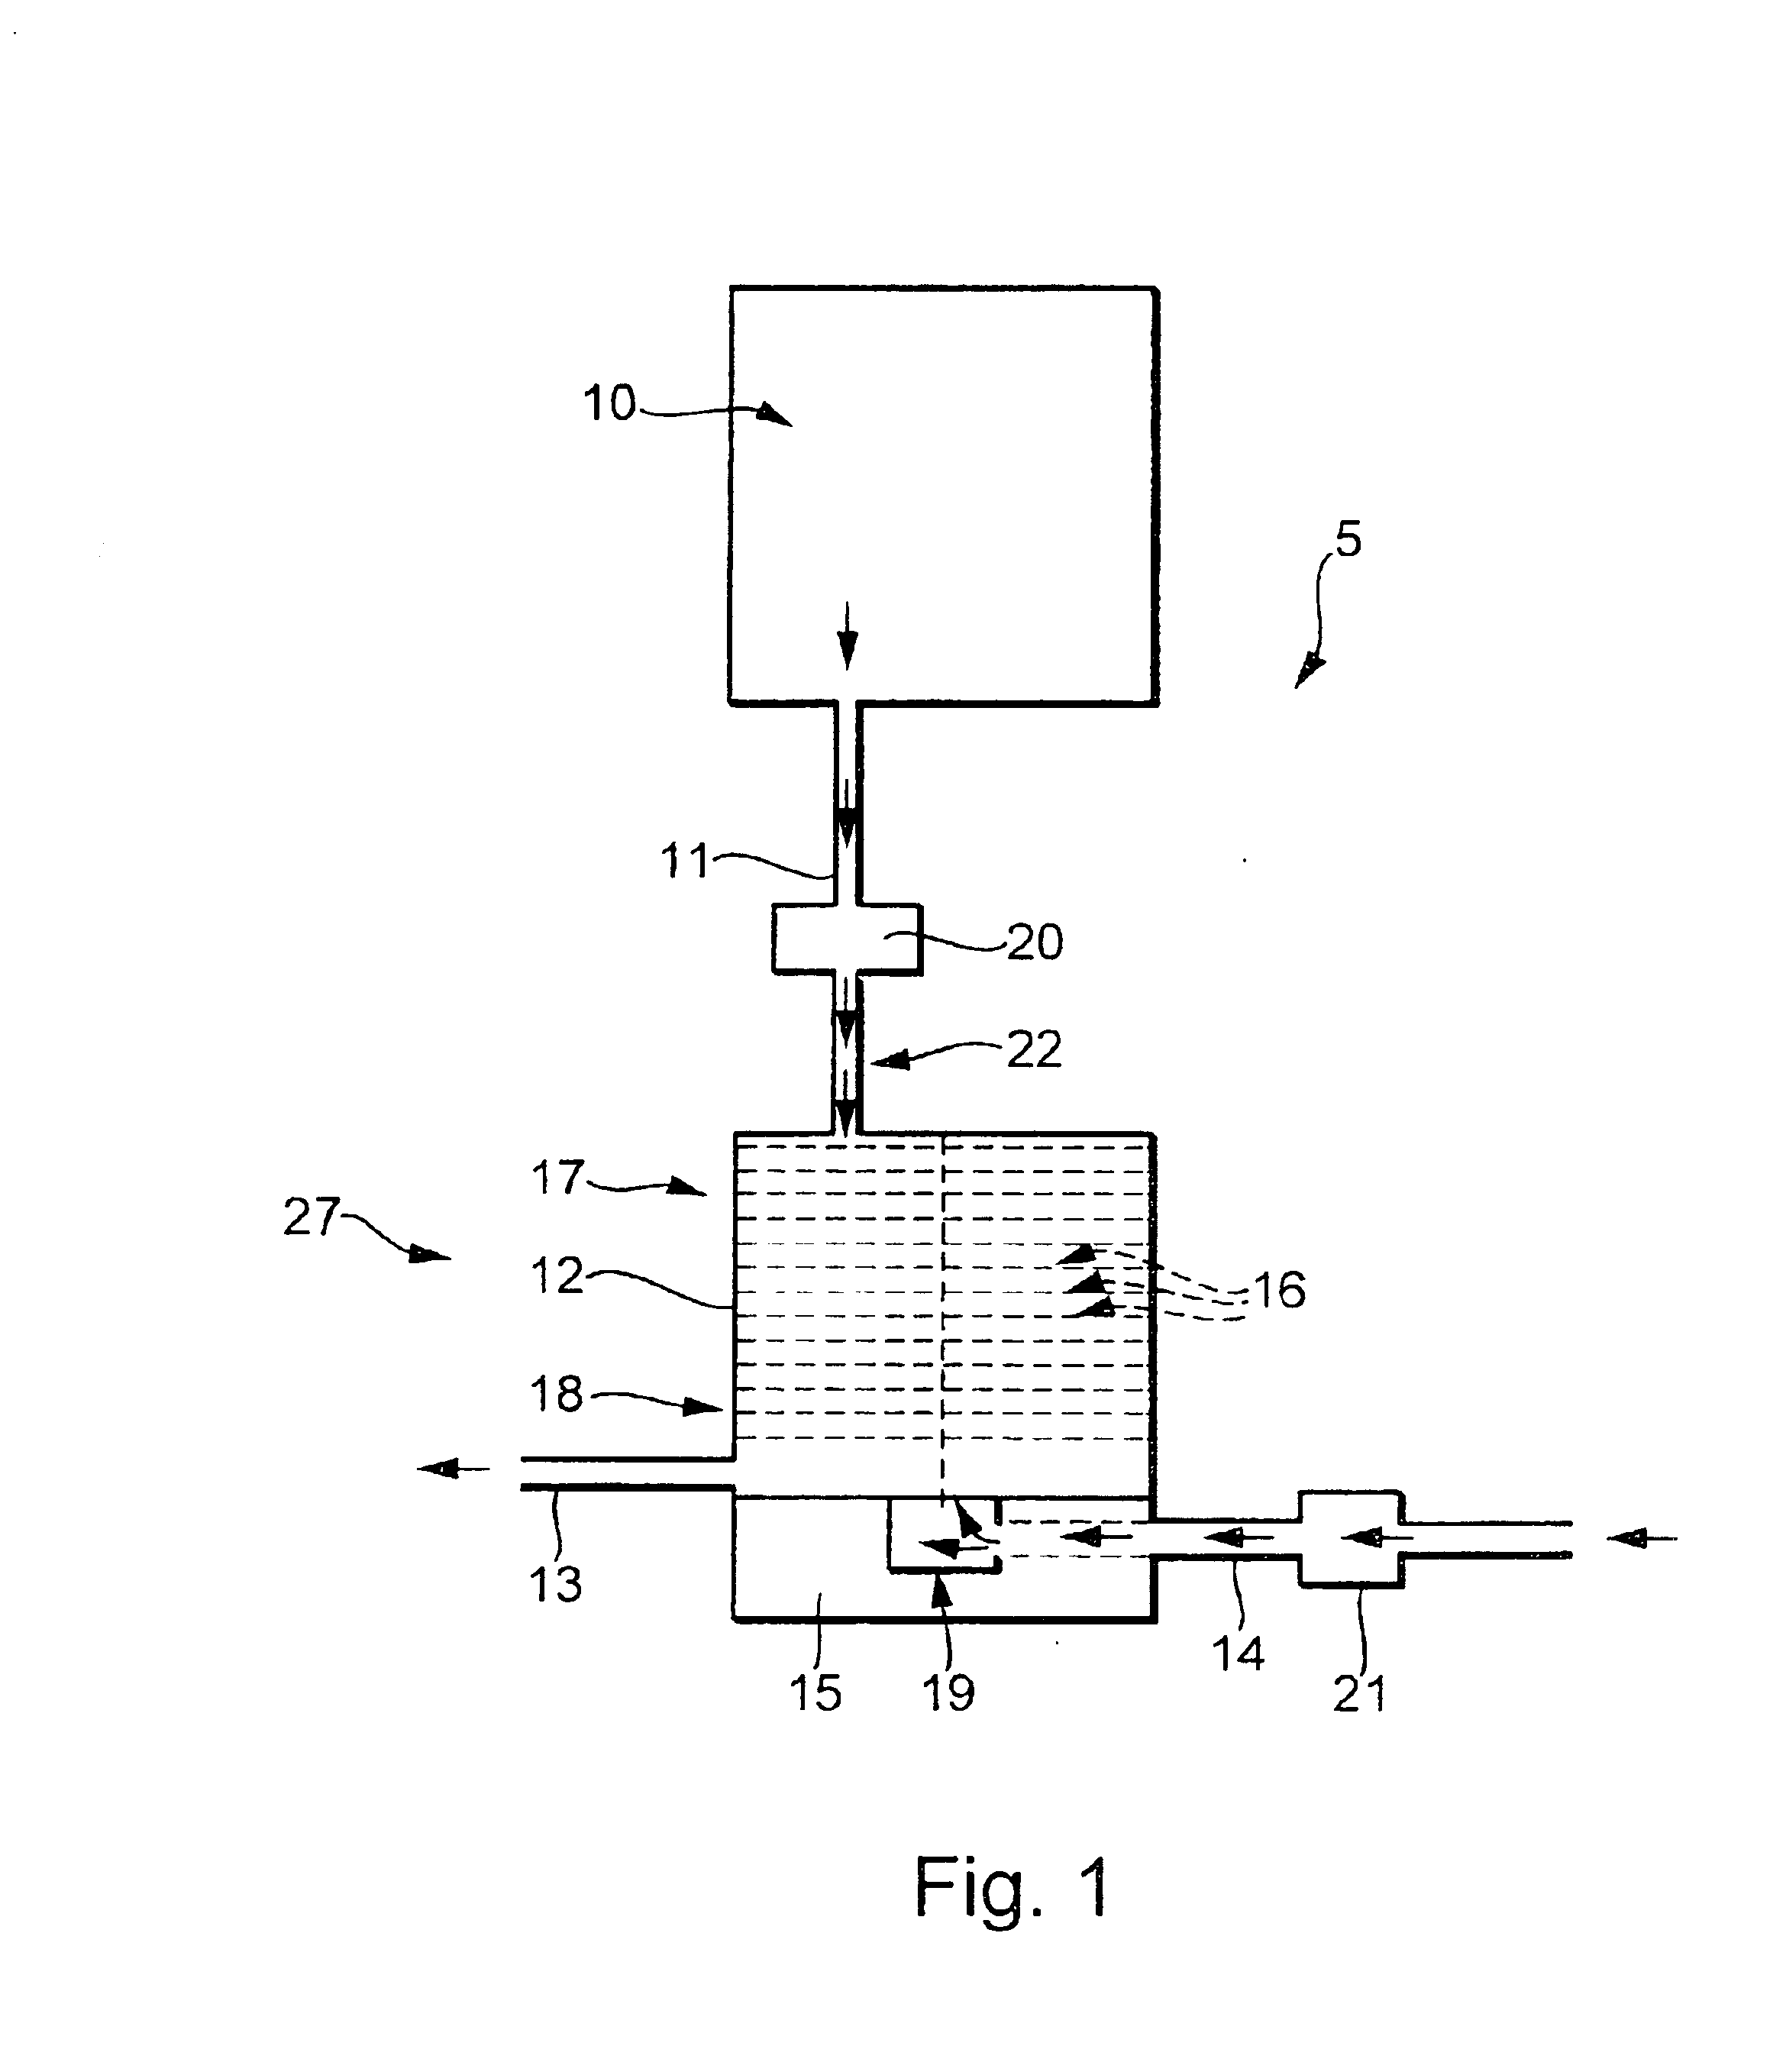 Method of avoiding or eliminating deposits in the exhaust area of a vacuum system